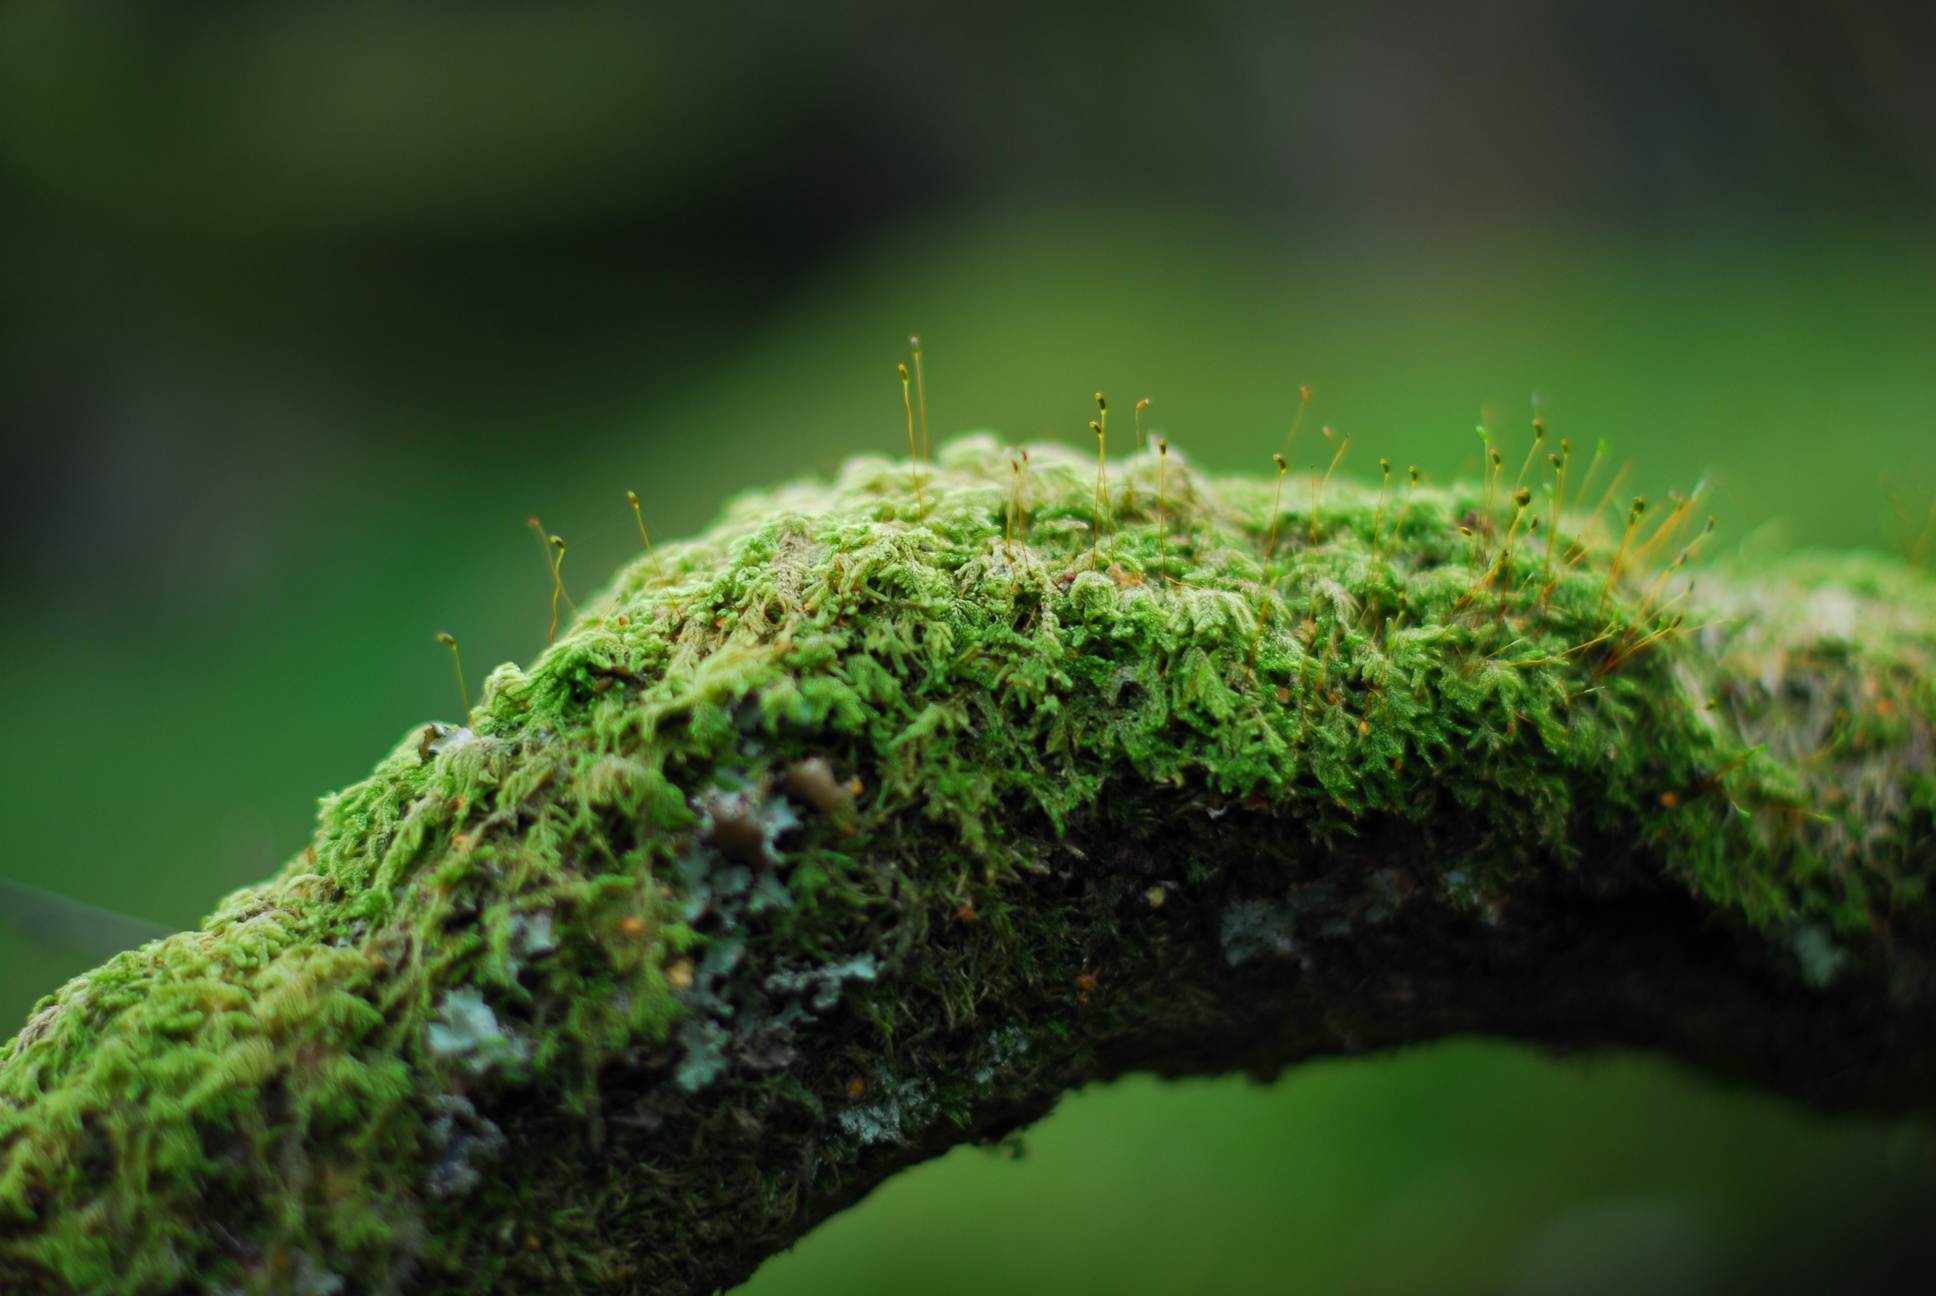 Moss on a Branch